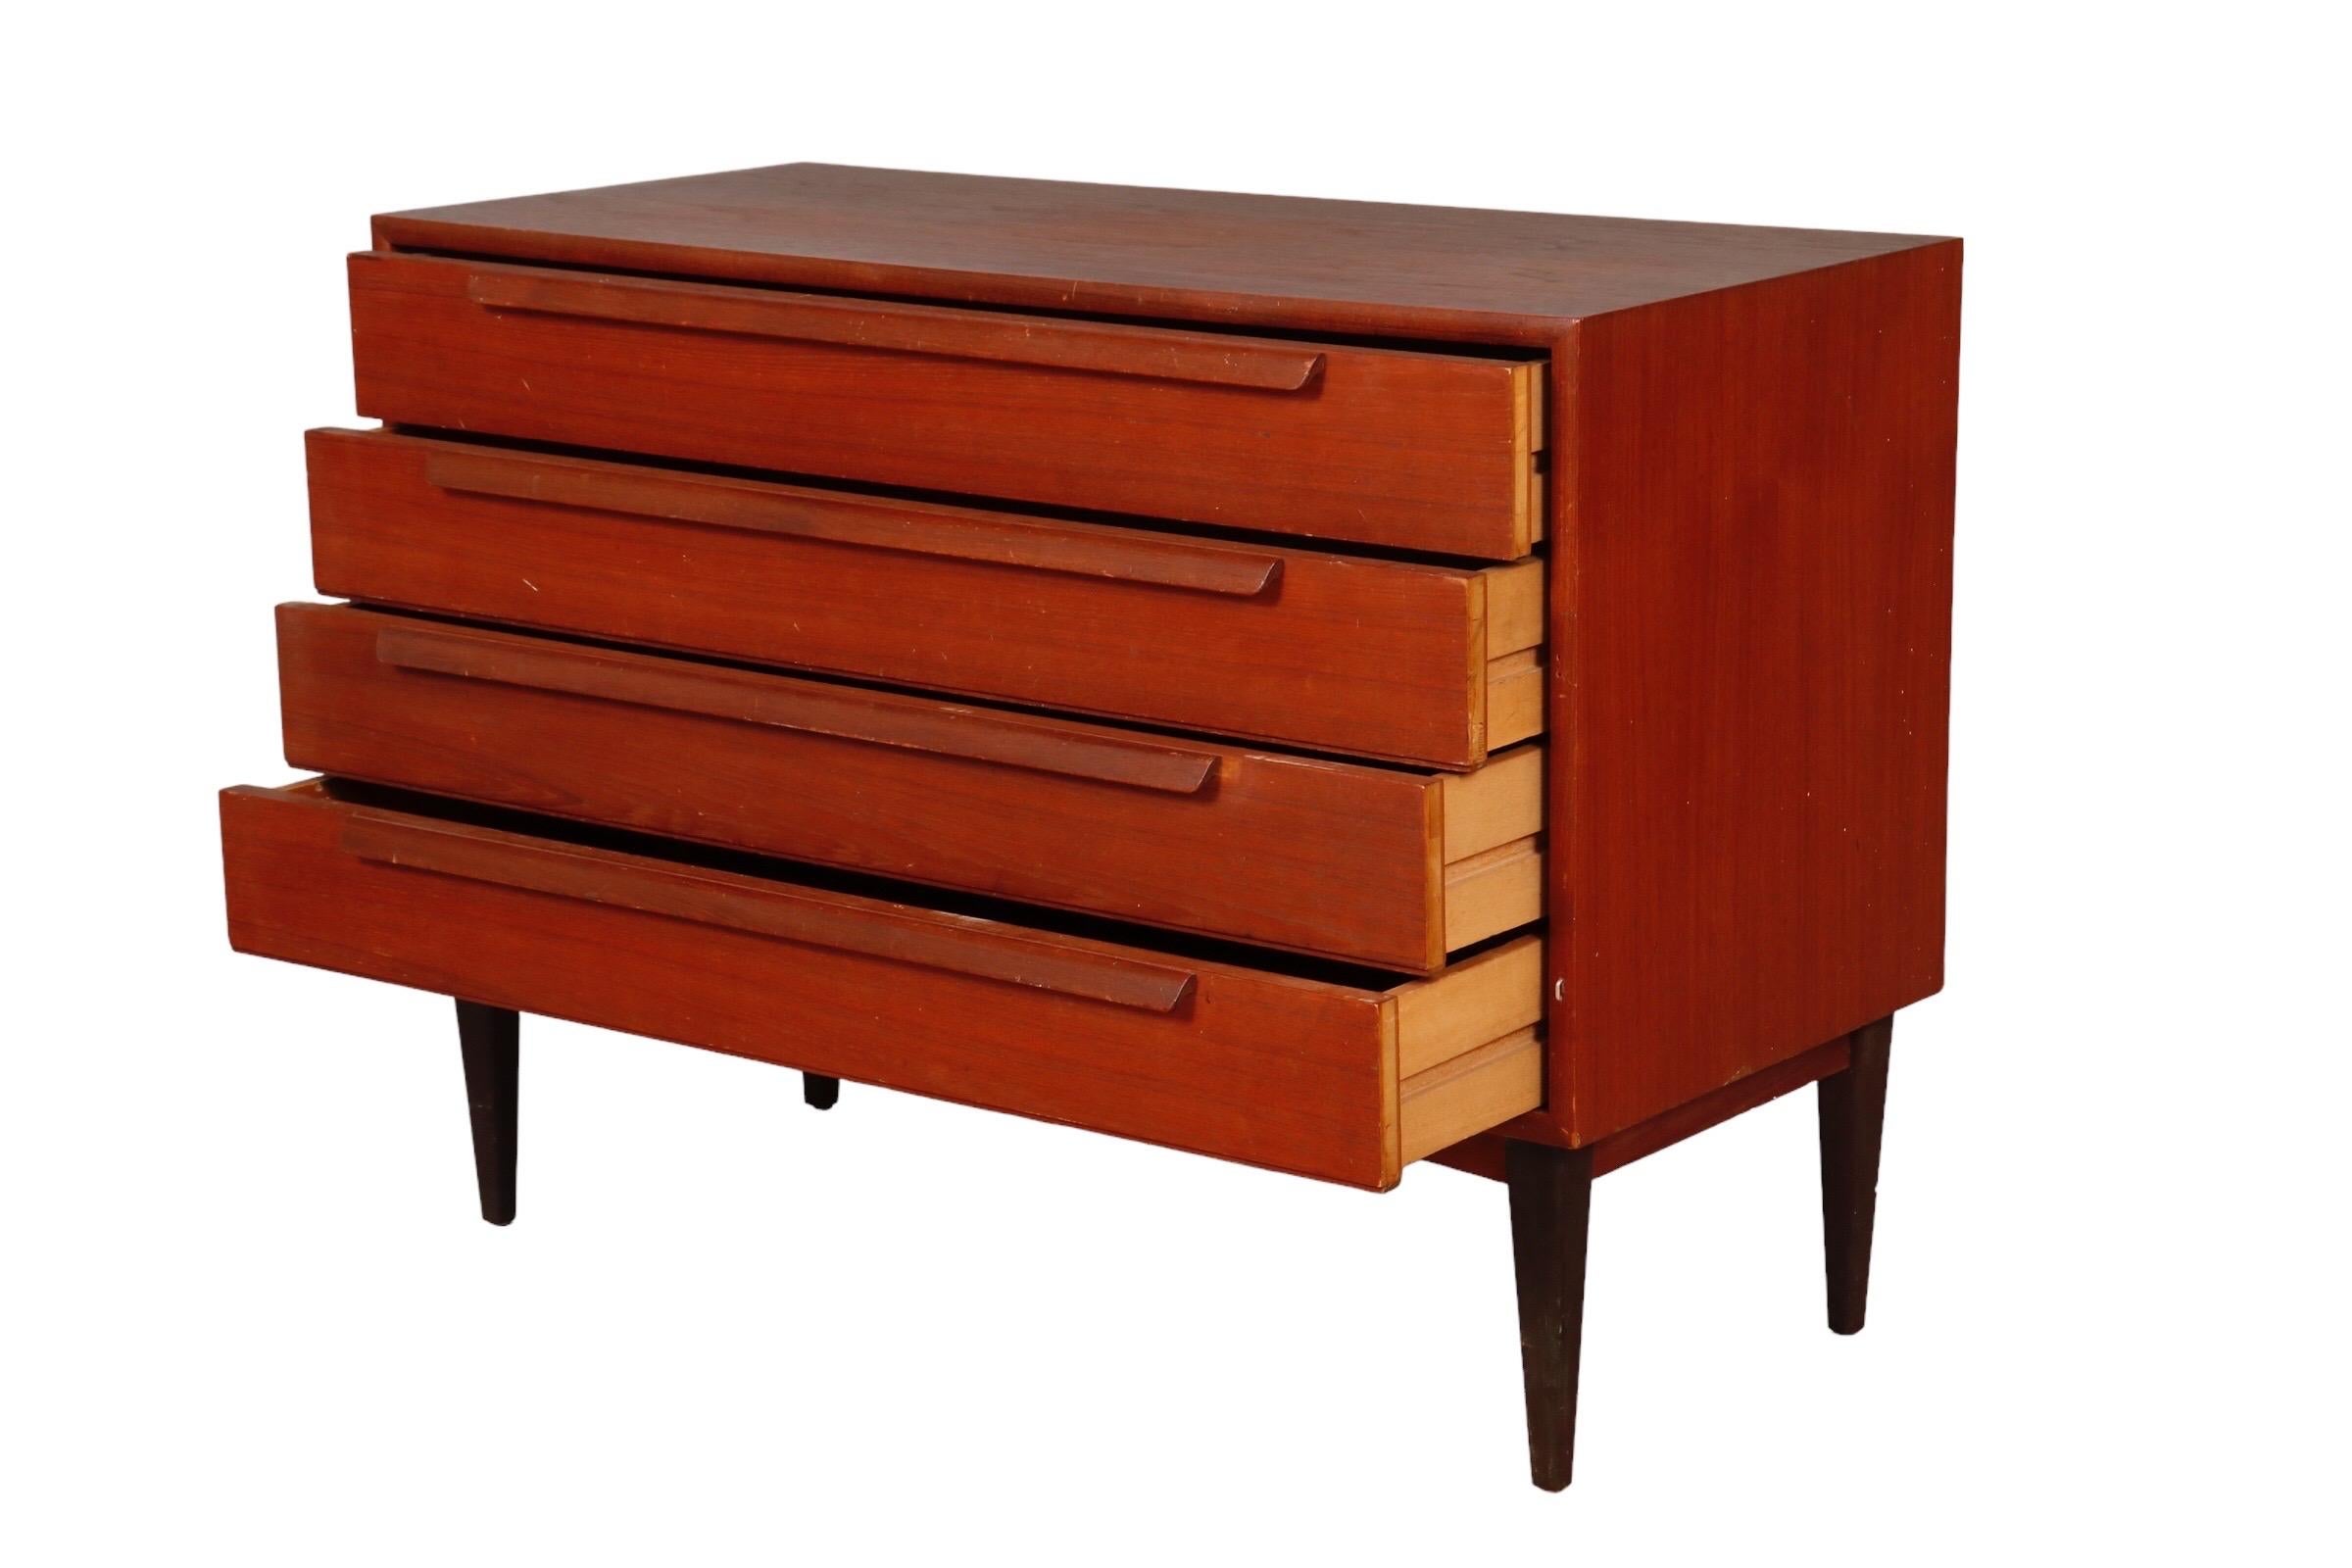 A mid century four drawer dresser made of teak. Each drawer opens with a long applied bar handle. Stands o. Round tapered legs.